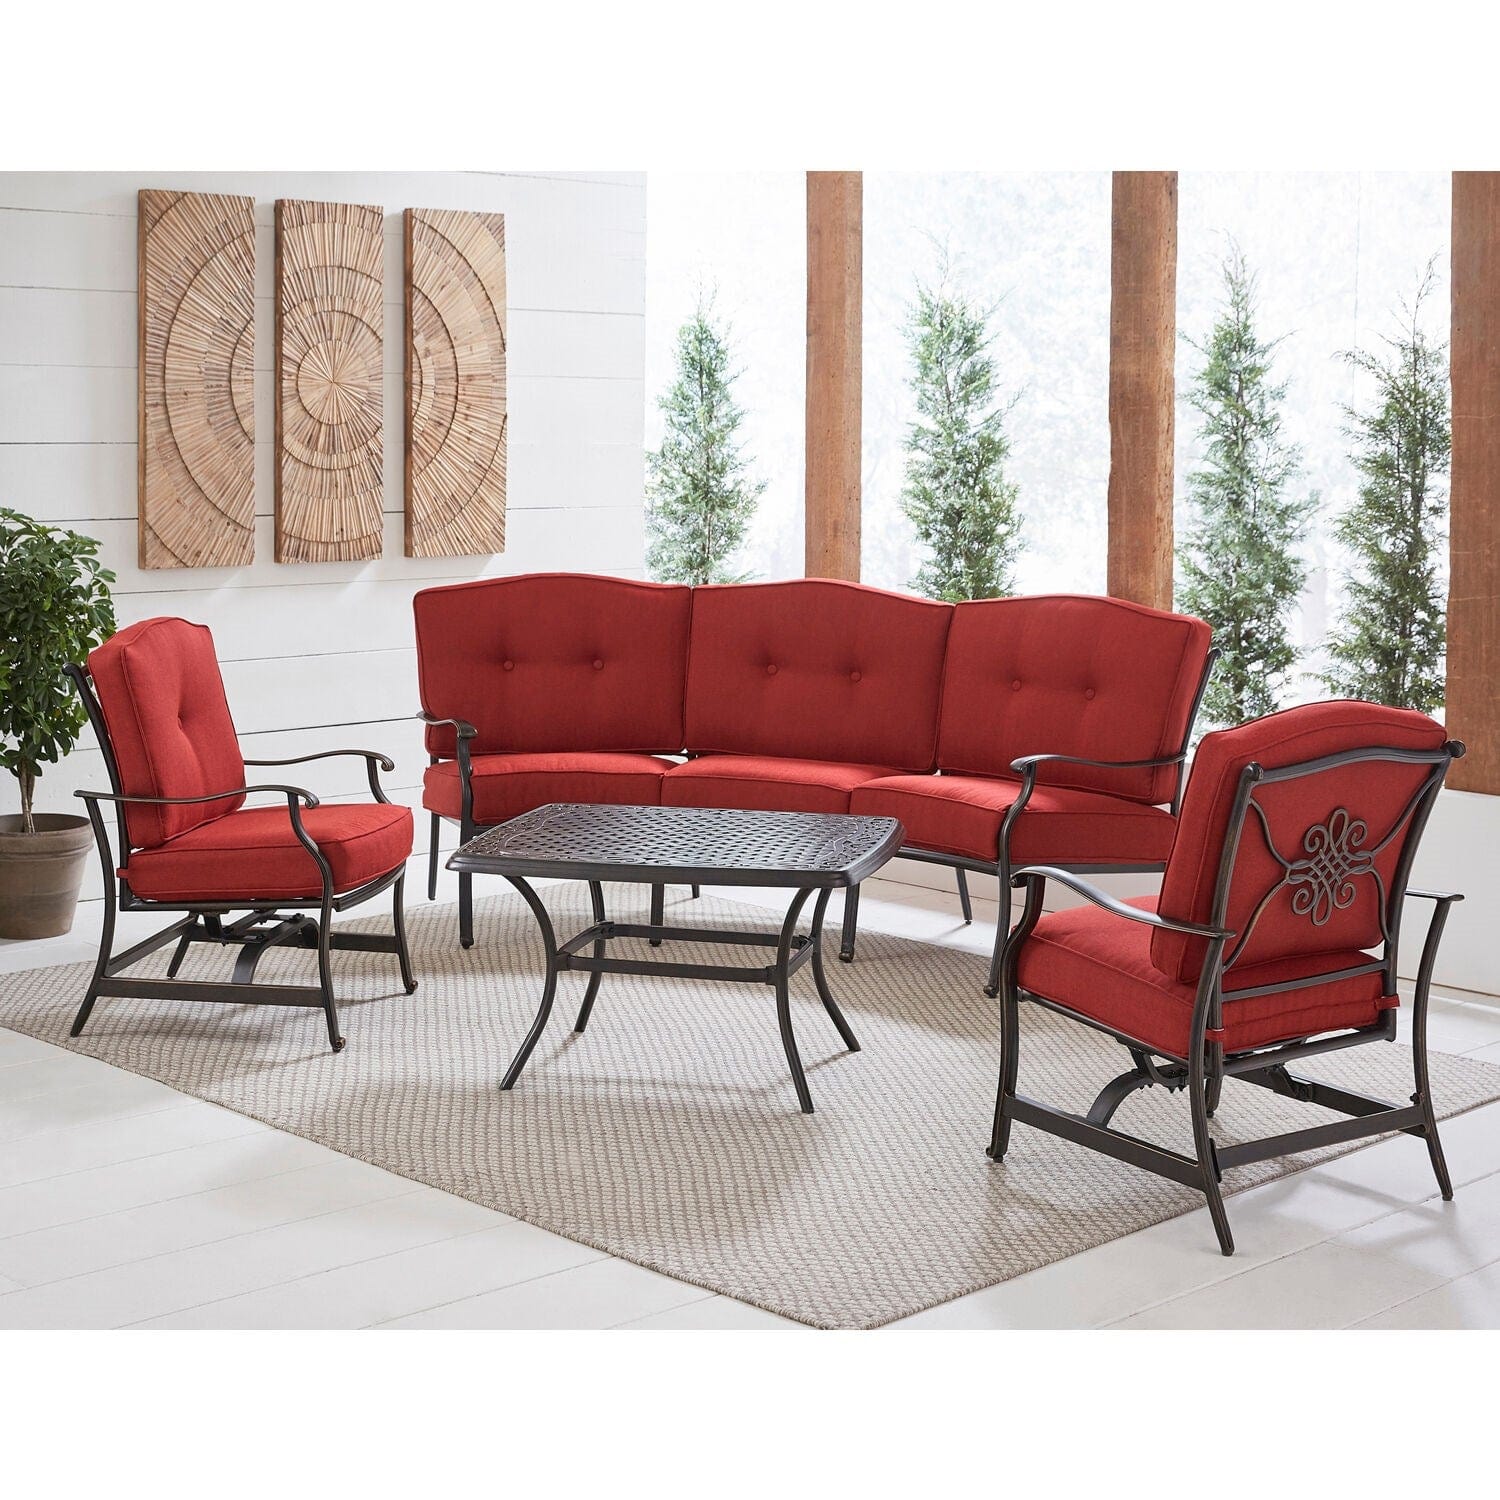 Hanover Conversation Set Hanover - Traditions 4-Piece Aluminum Patio Conversation Set with Red Cushion, Cast-Top Coffee Table, Sofa and 2-Rockers | TRAD4PCCT-RED